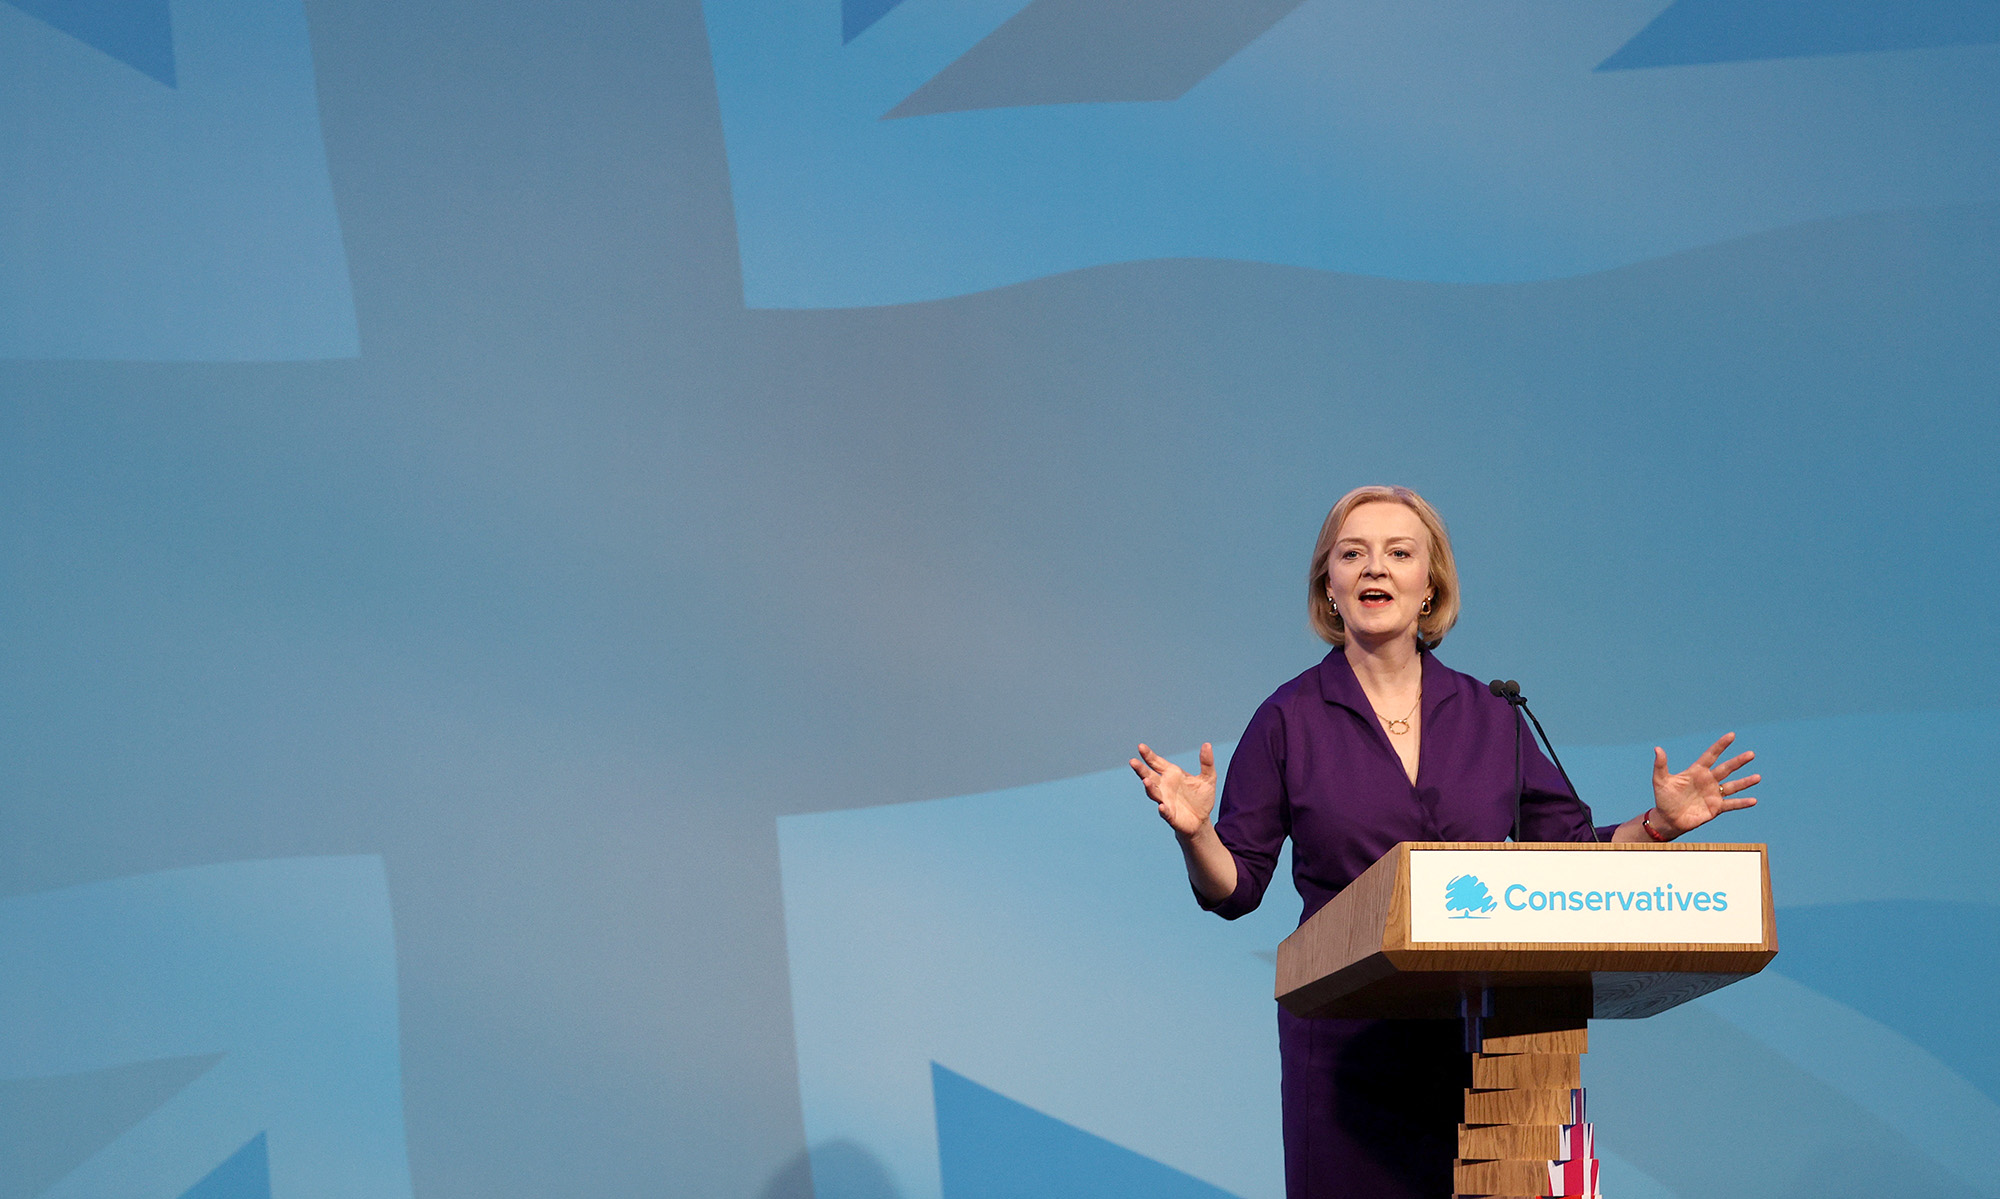 New Conservative Party leader and Britain's Prime Minister-elect Liz Truss delivers a speech at an event to announce the winner of the Conservative Party leadership contest in central London, England, on September 5.